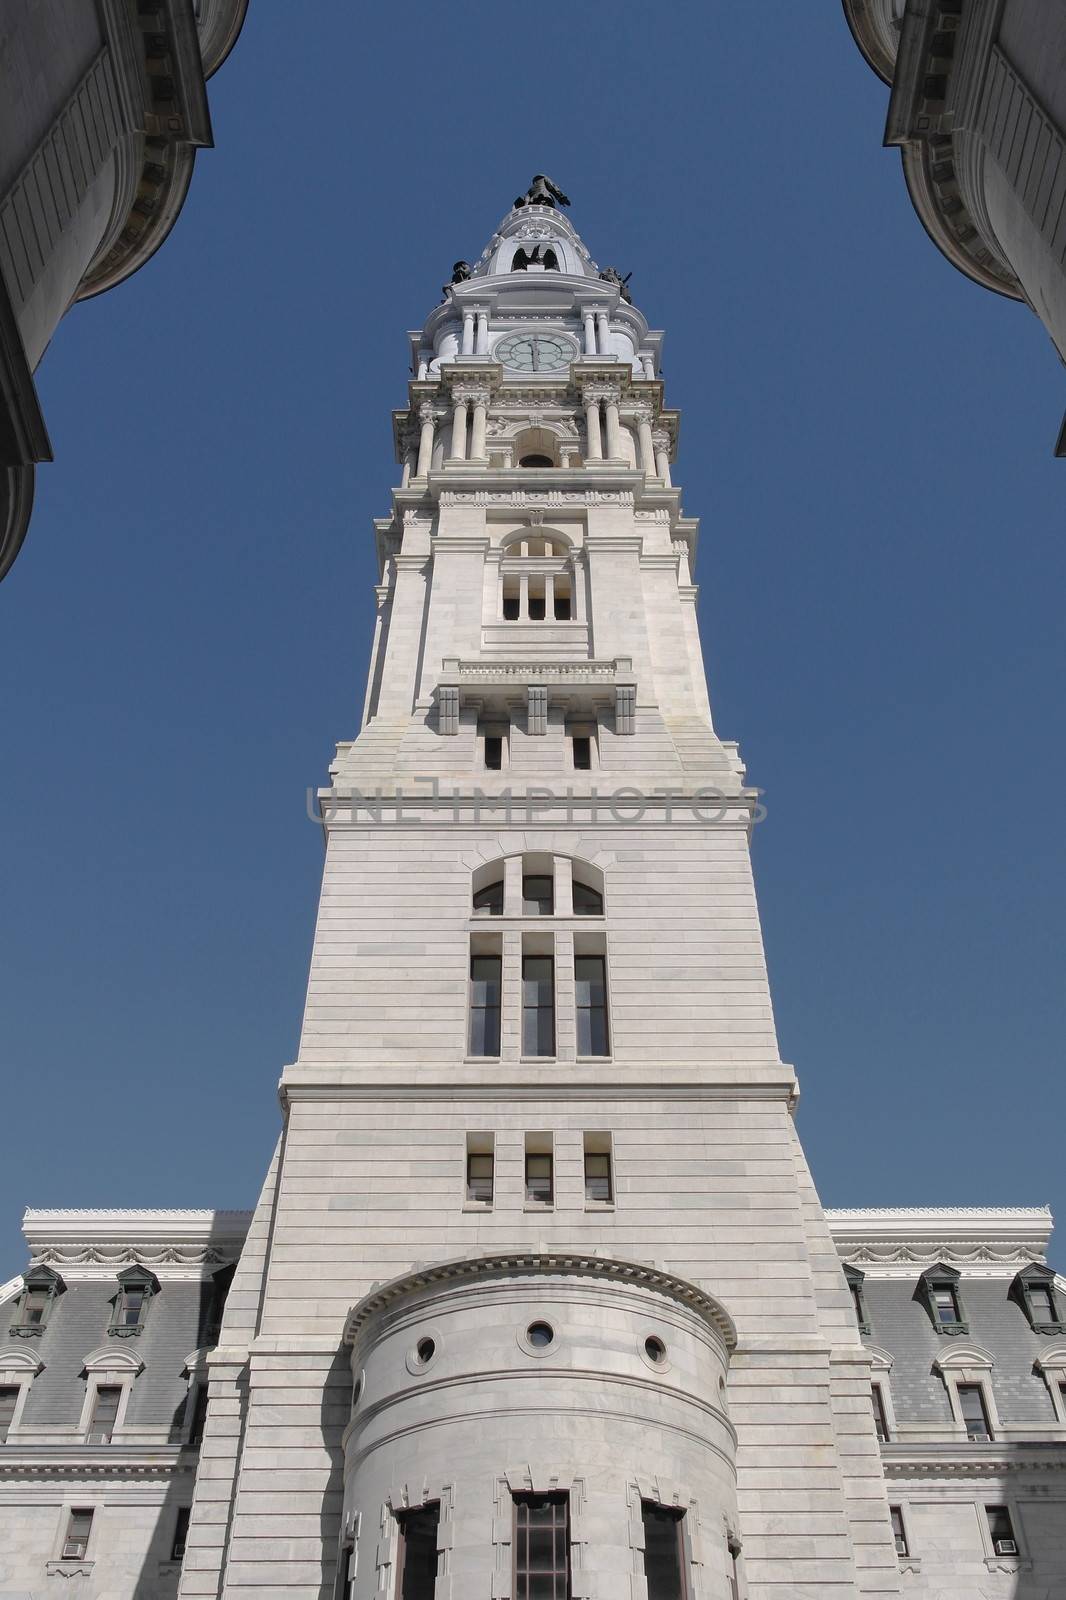 City hall in Downtown Philadelpia, pennsylvania by gary718